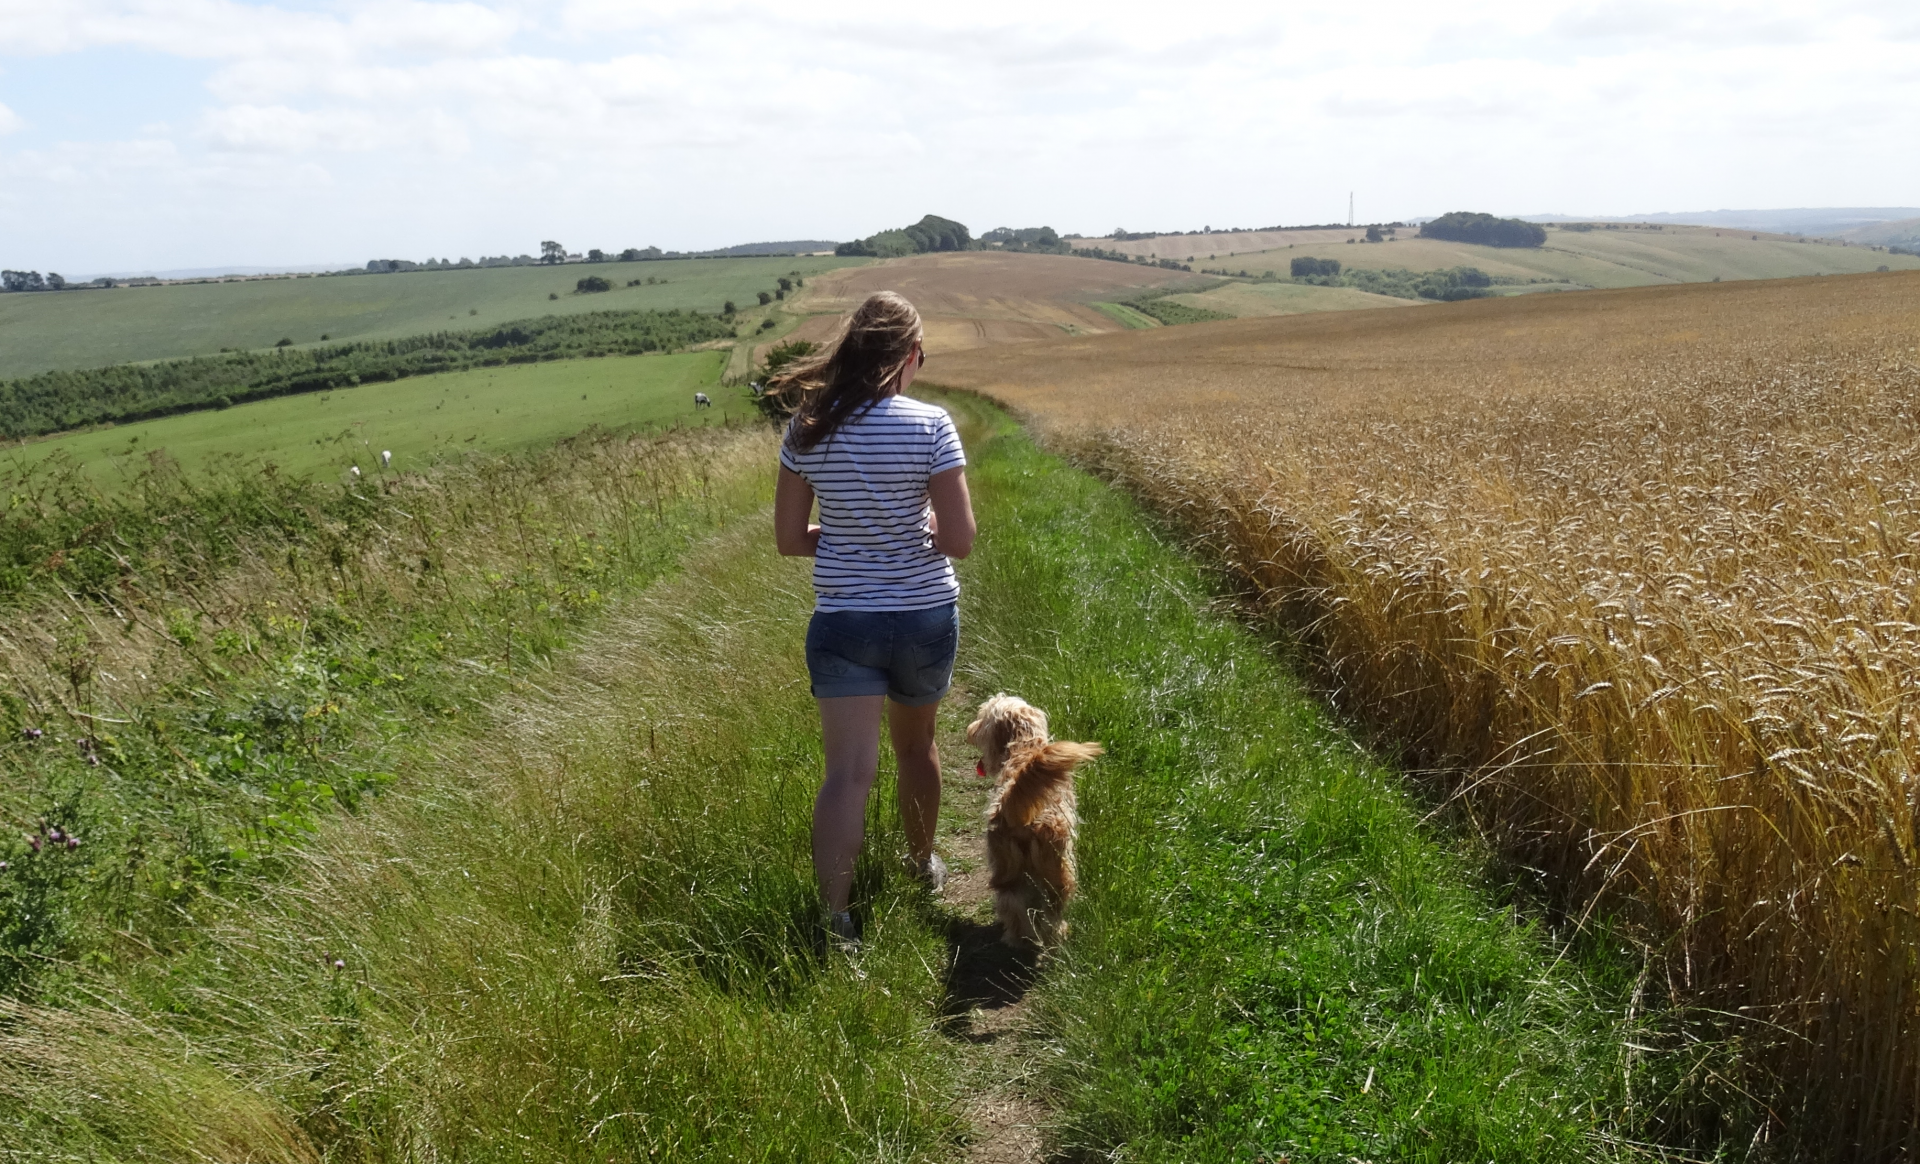 Green open field with lady and dog walking away